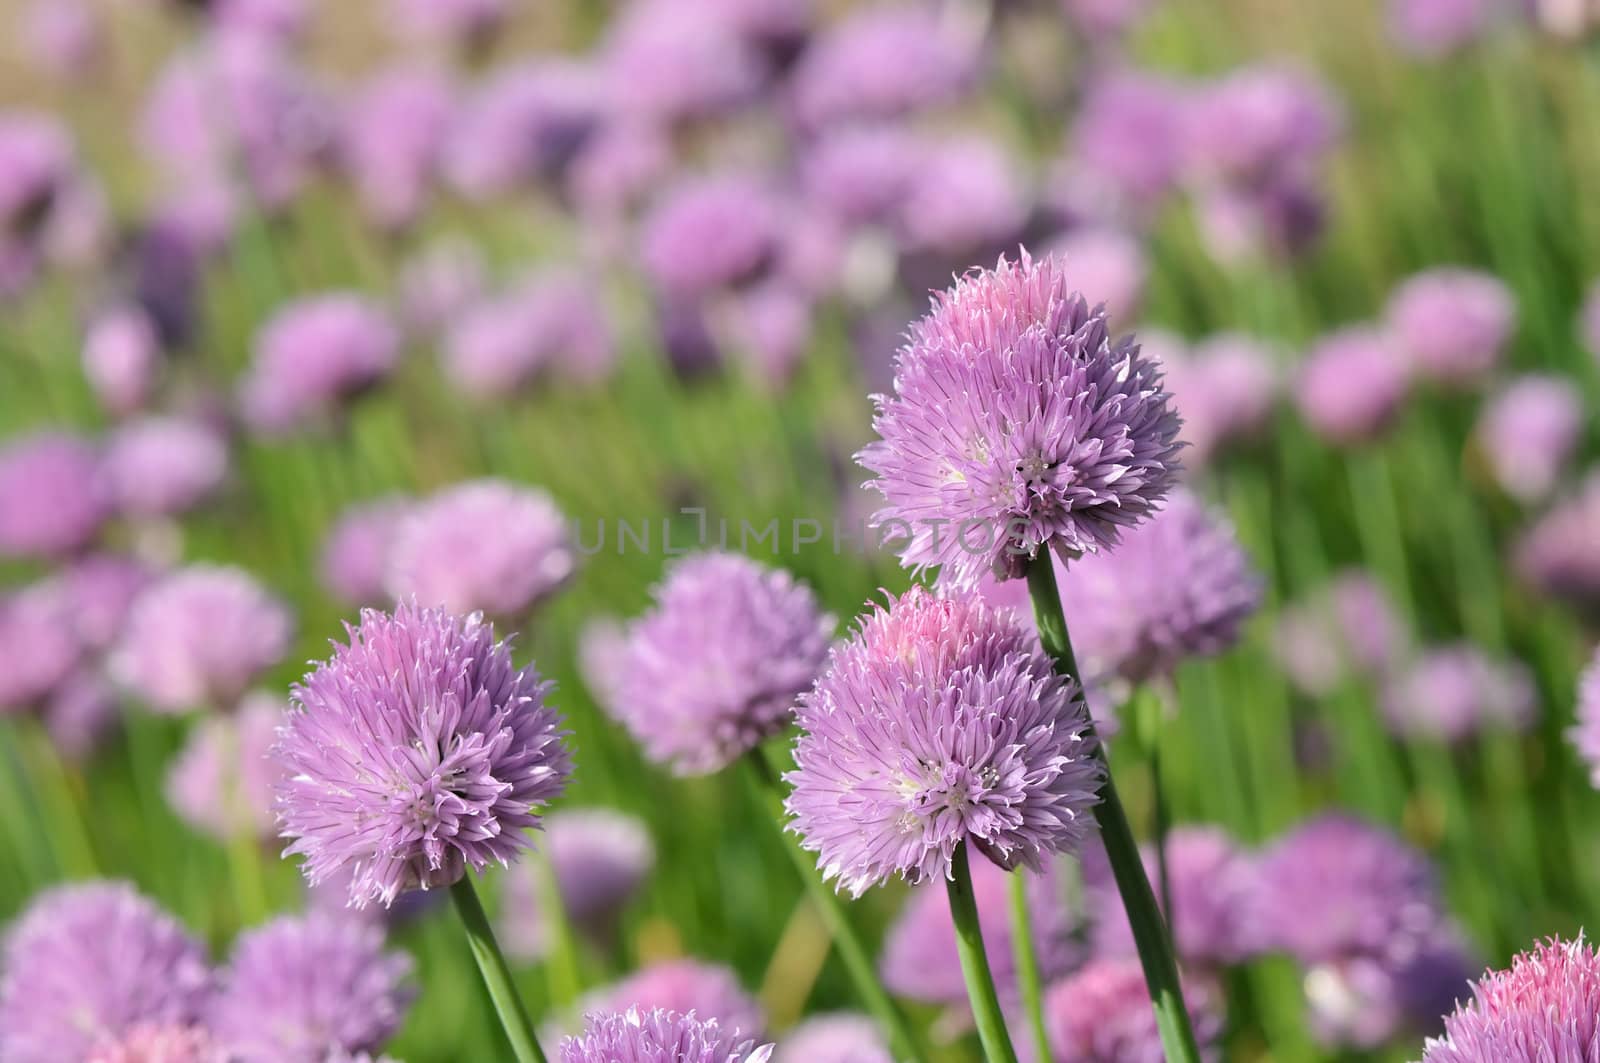 Chive flowers by Hbak